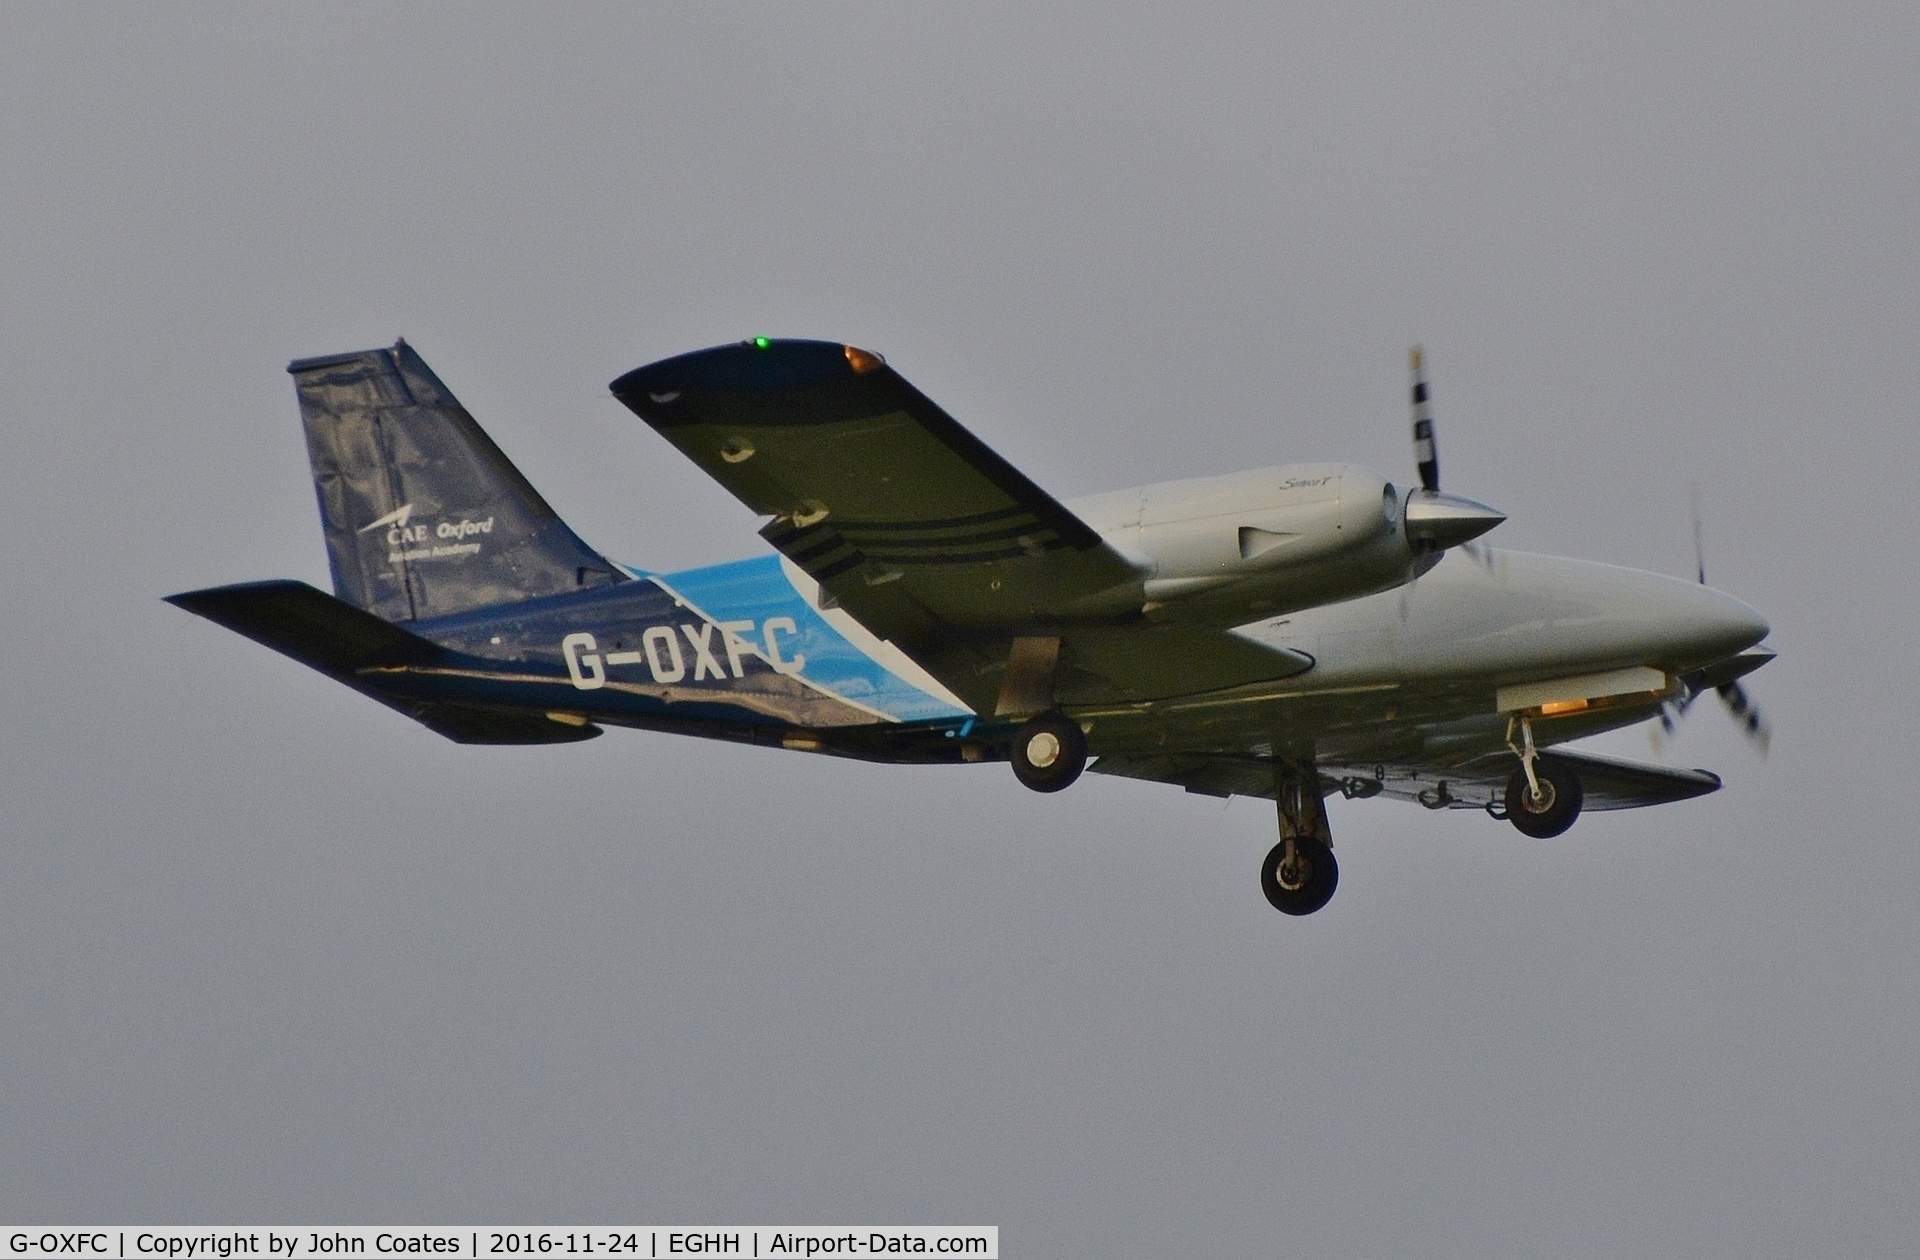 G-OXFC, 2013 Piper PA-34-220T Seneca V C/N 34-49481, Training approach to 08